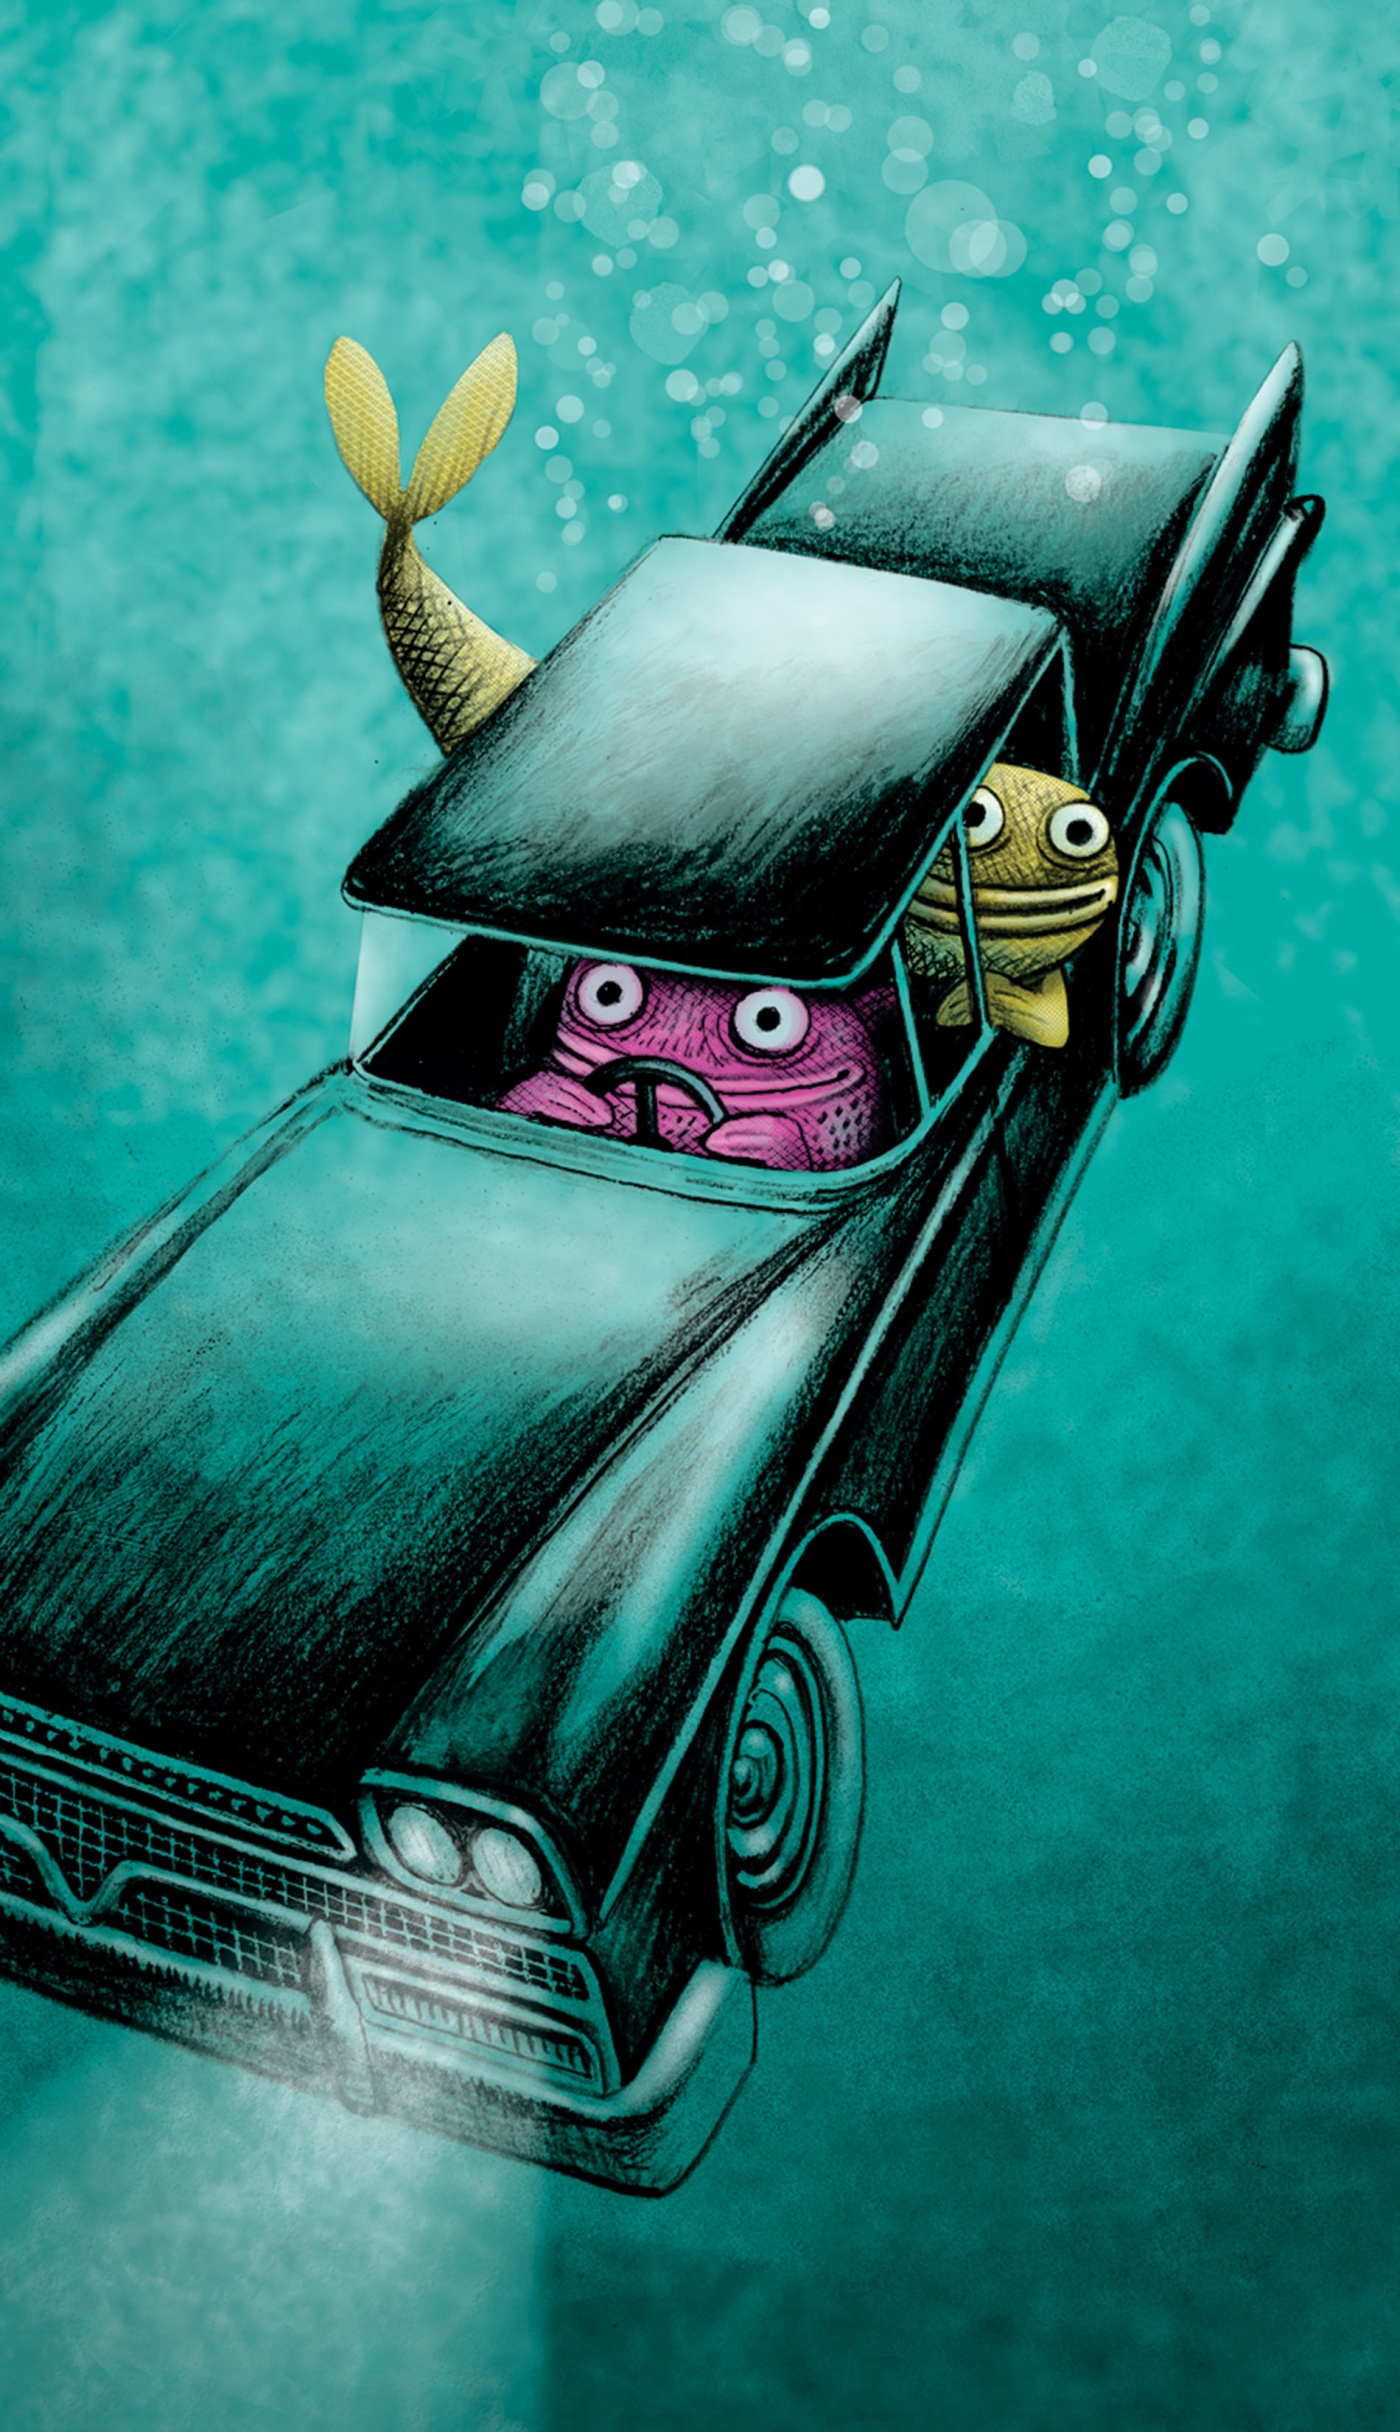 Illustration by Klaas Verplancke of two fish driving a sinking car underwater.